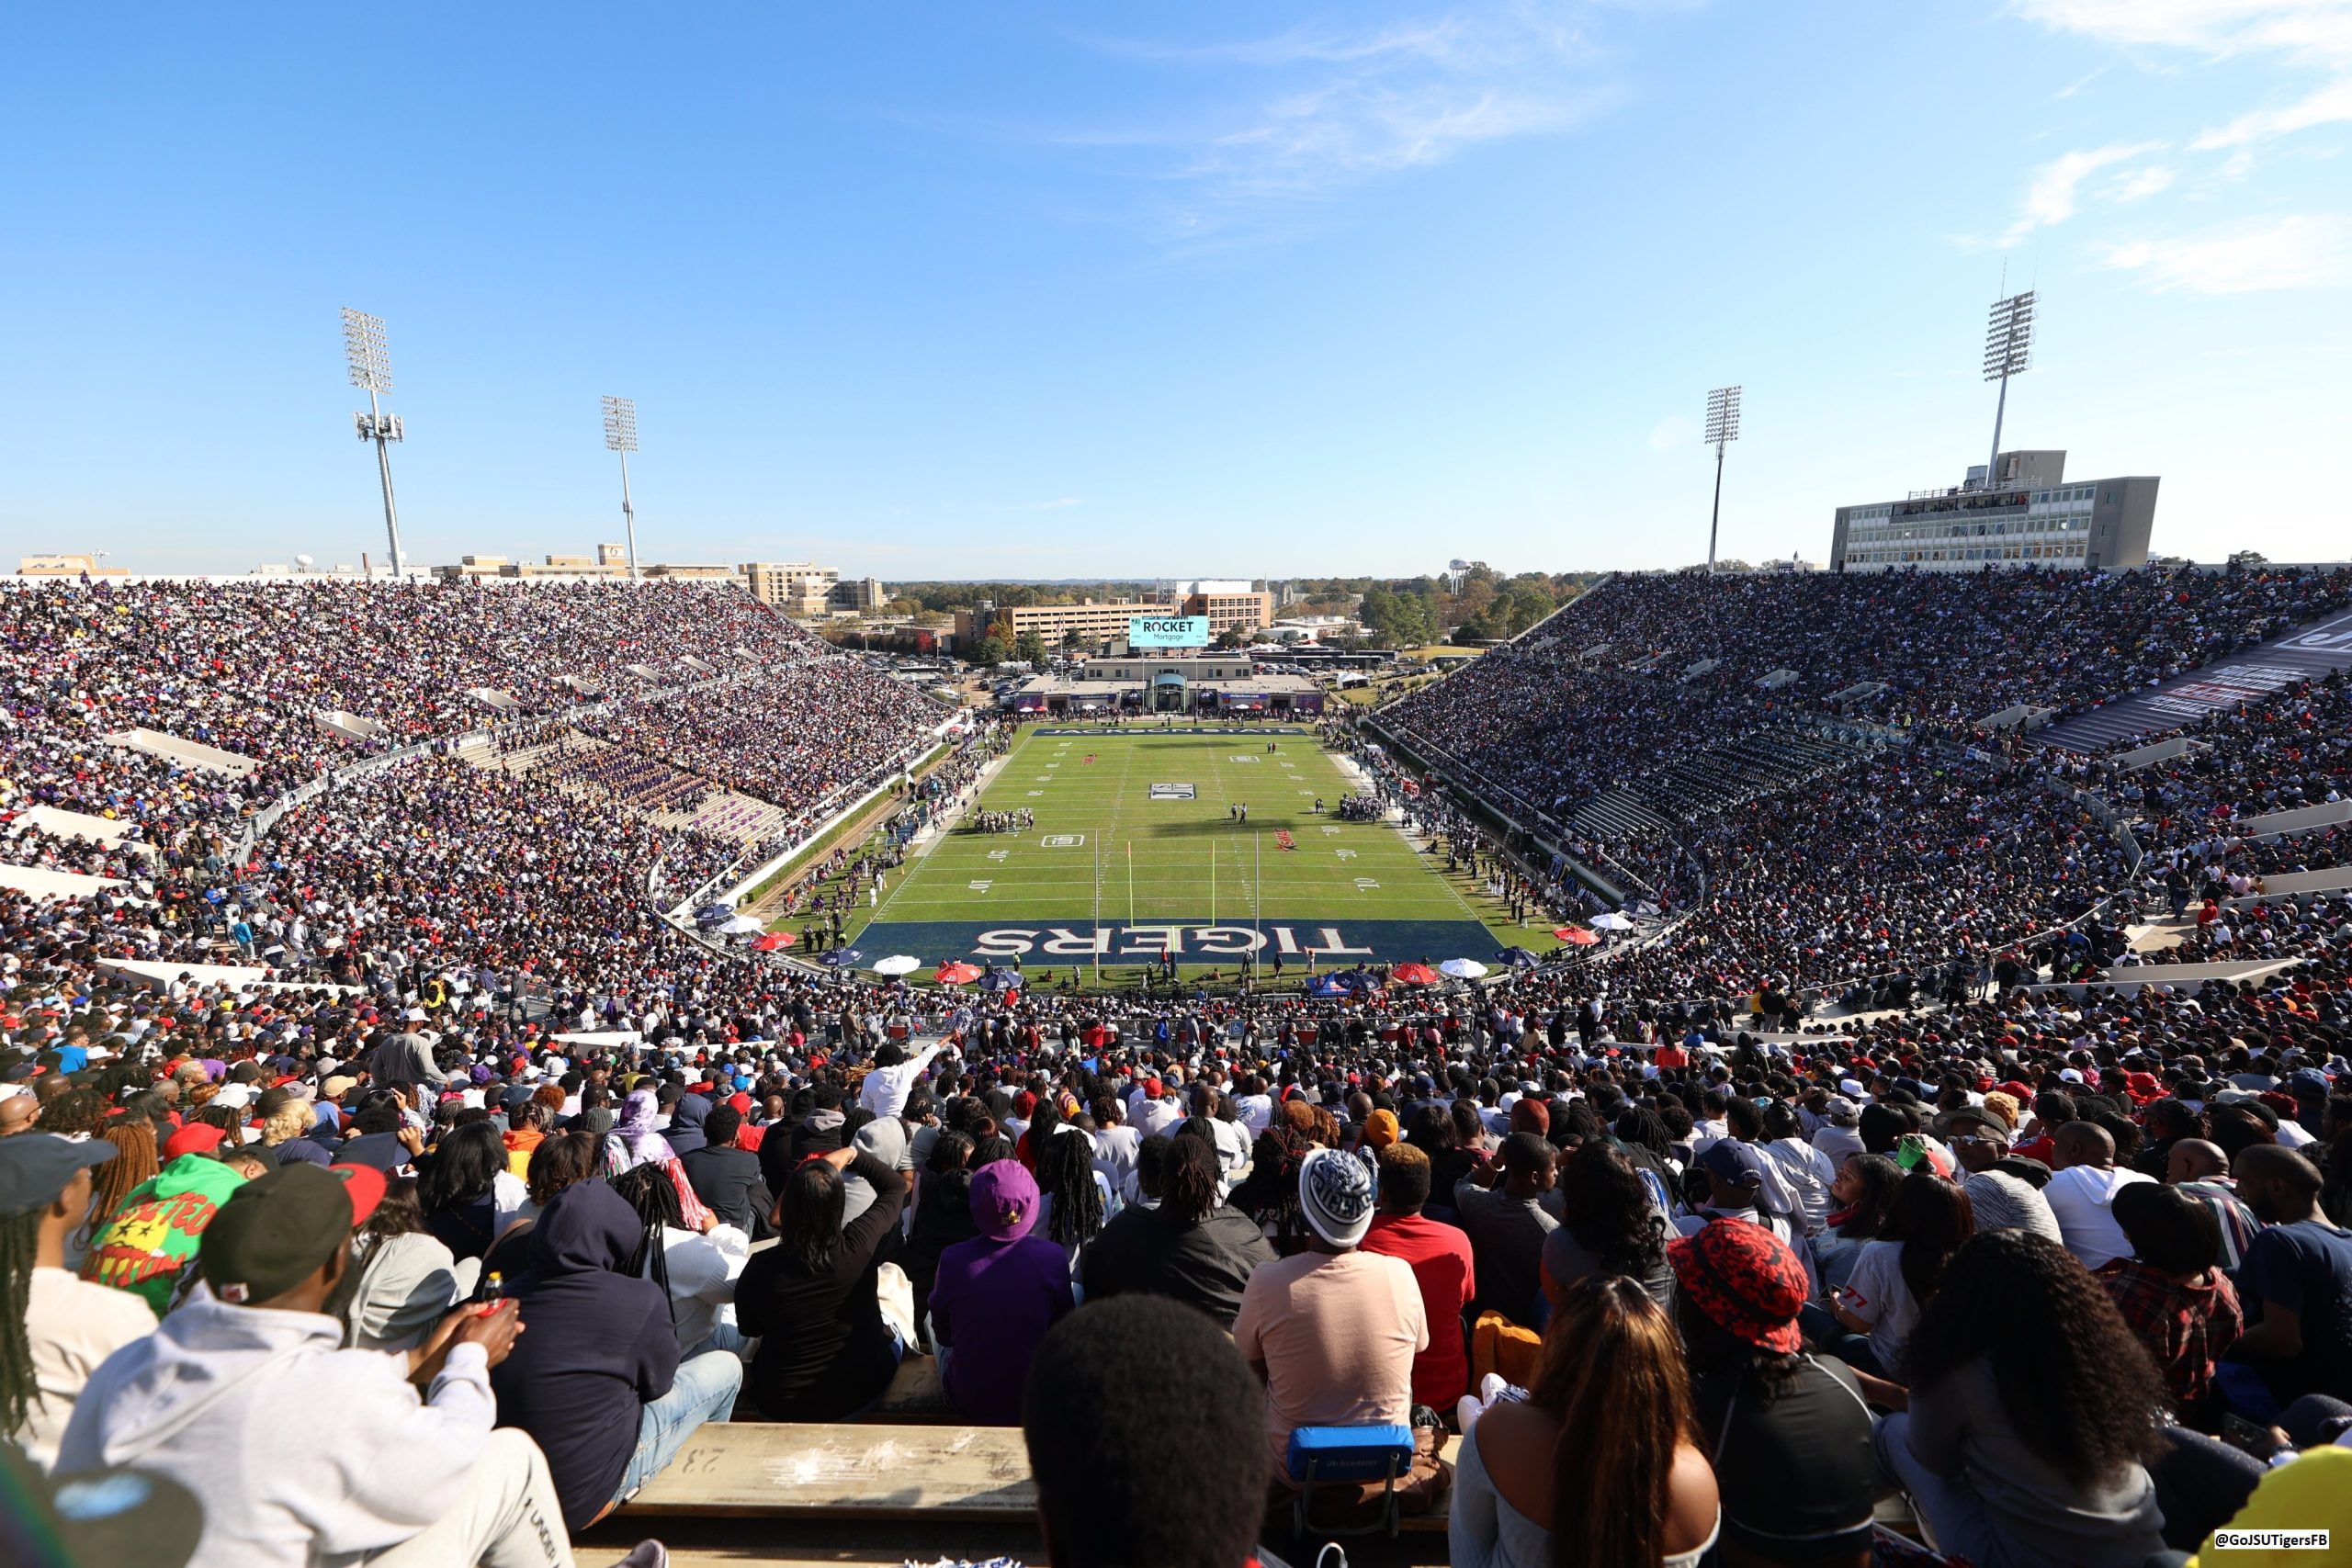 Under Coach Prime, Jackson State Attendance Soars | The Analyst